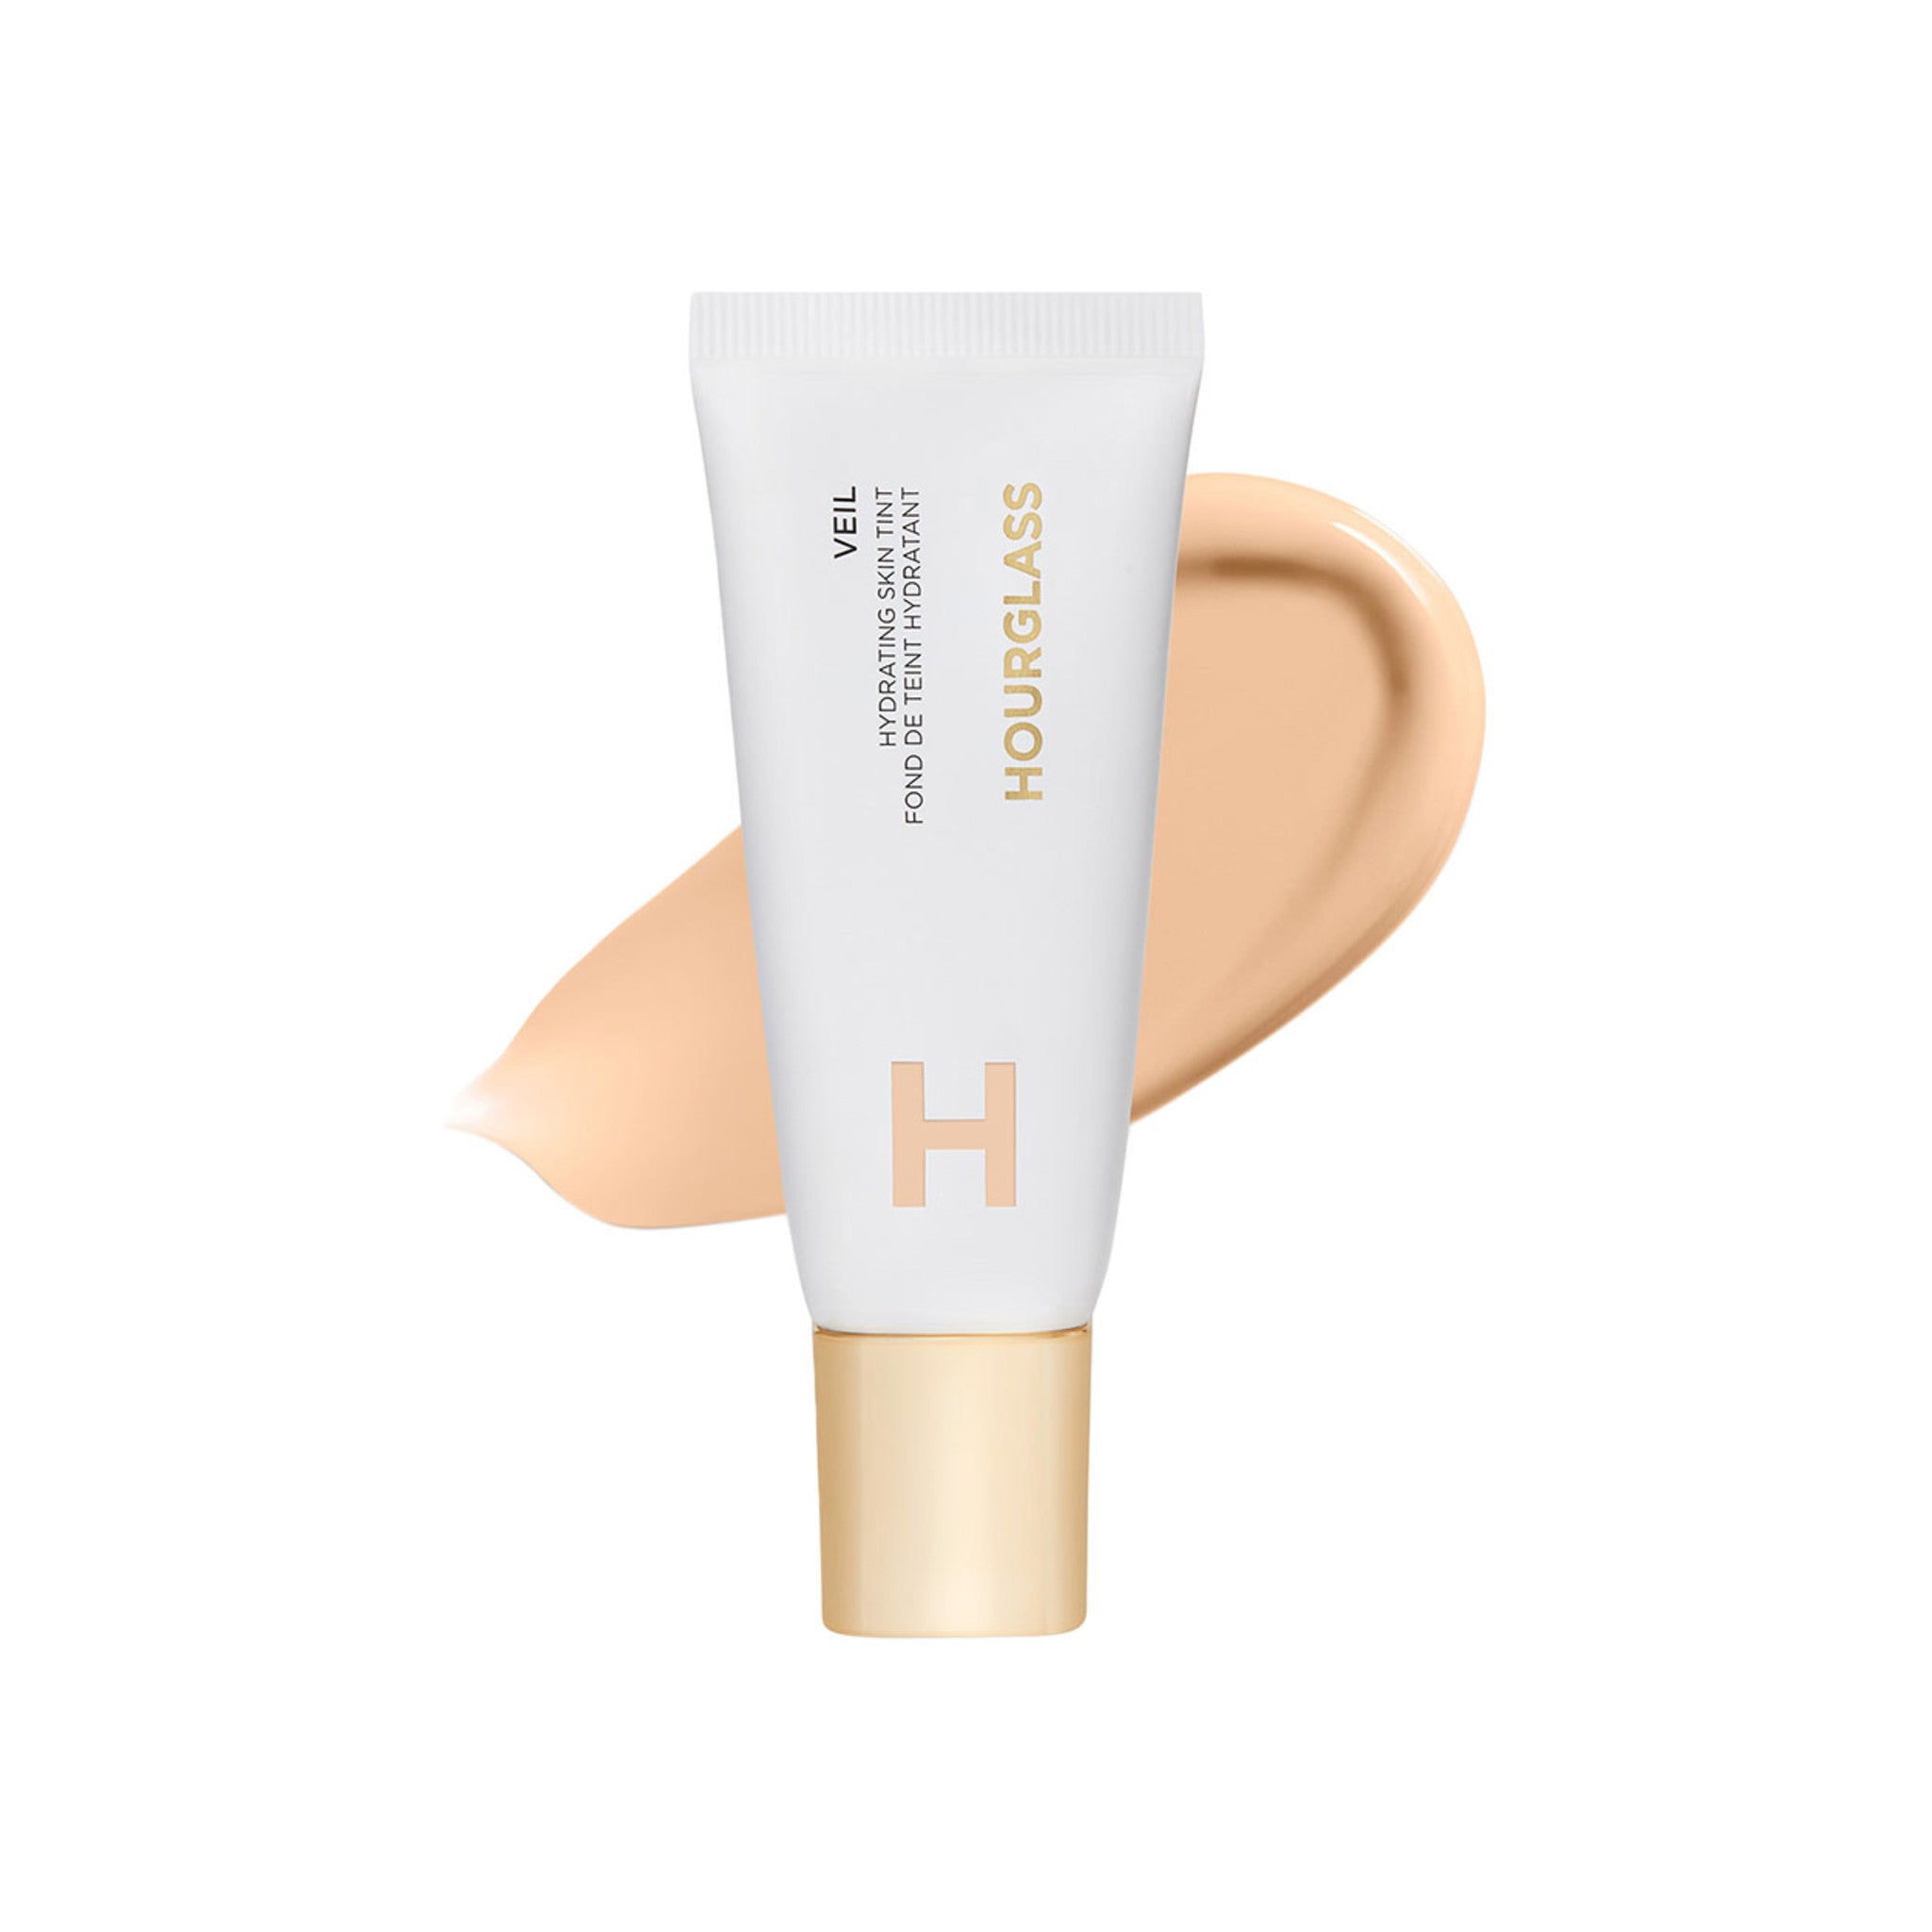 Hourglass Veil Hydrating Skin Tint Color/Shade variant: 1 main image. This product is for light complexions